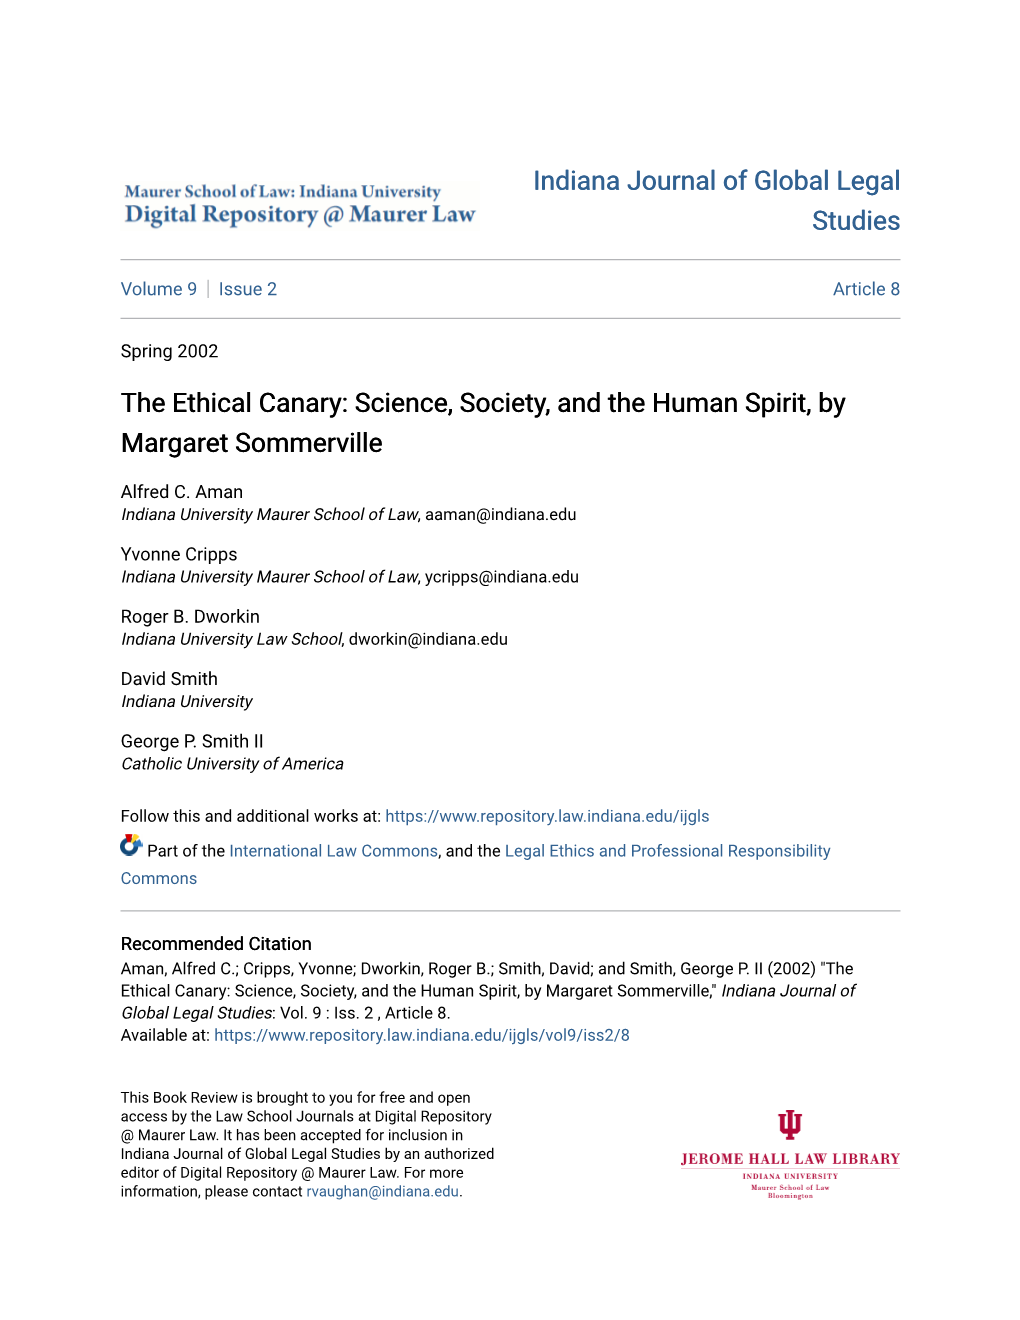 The Ethical Canary: Science, Society, and the Human Spirit, by Margaret Sommerville